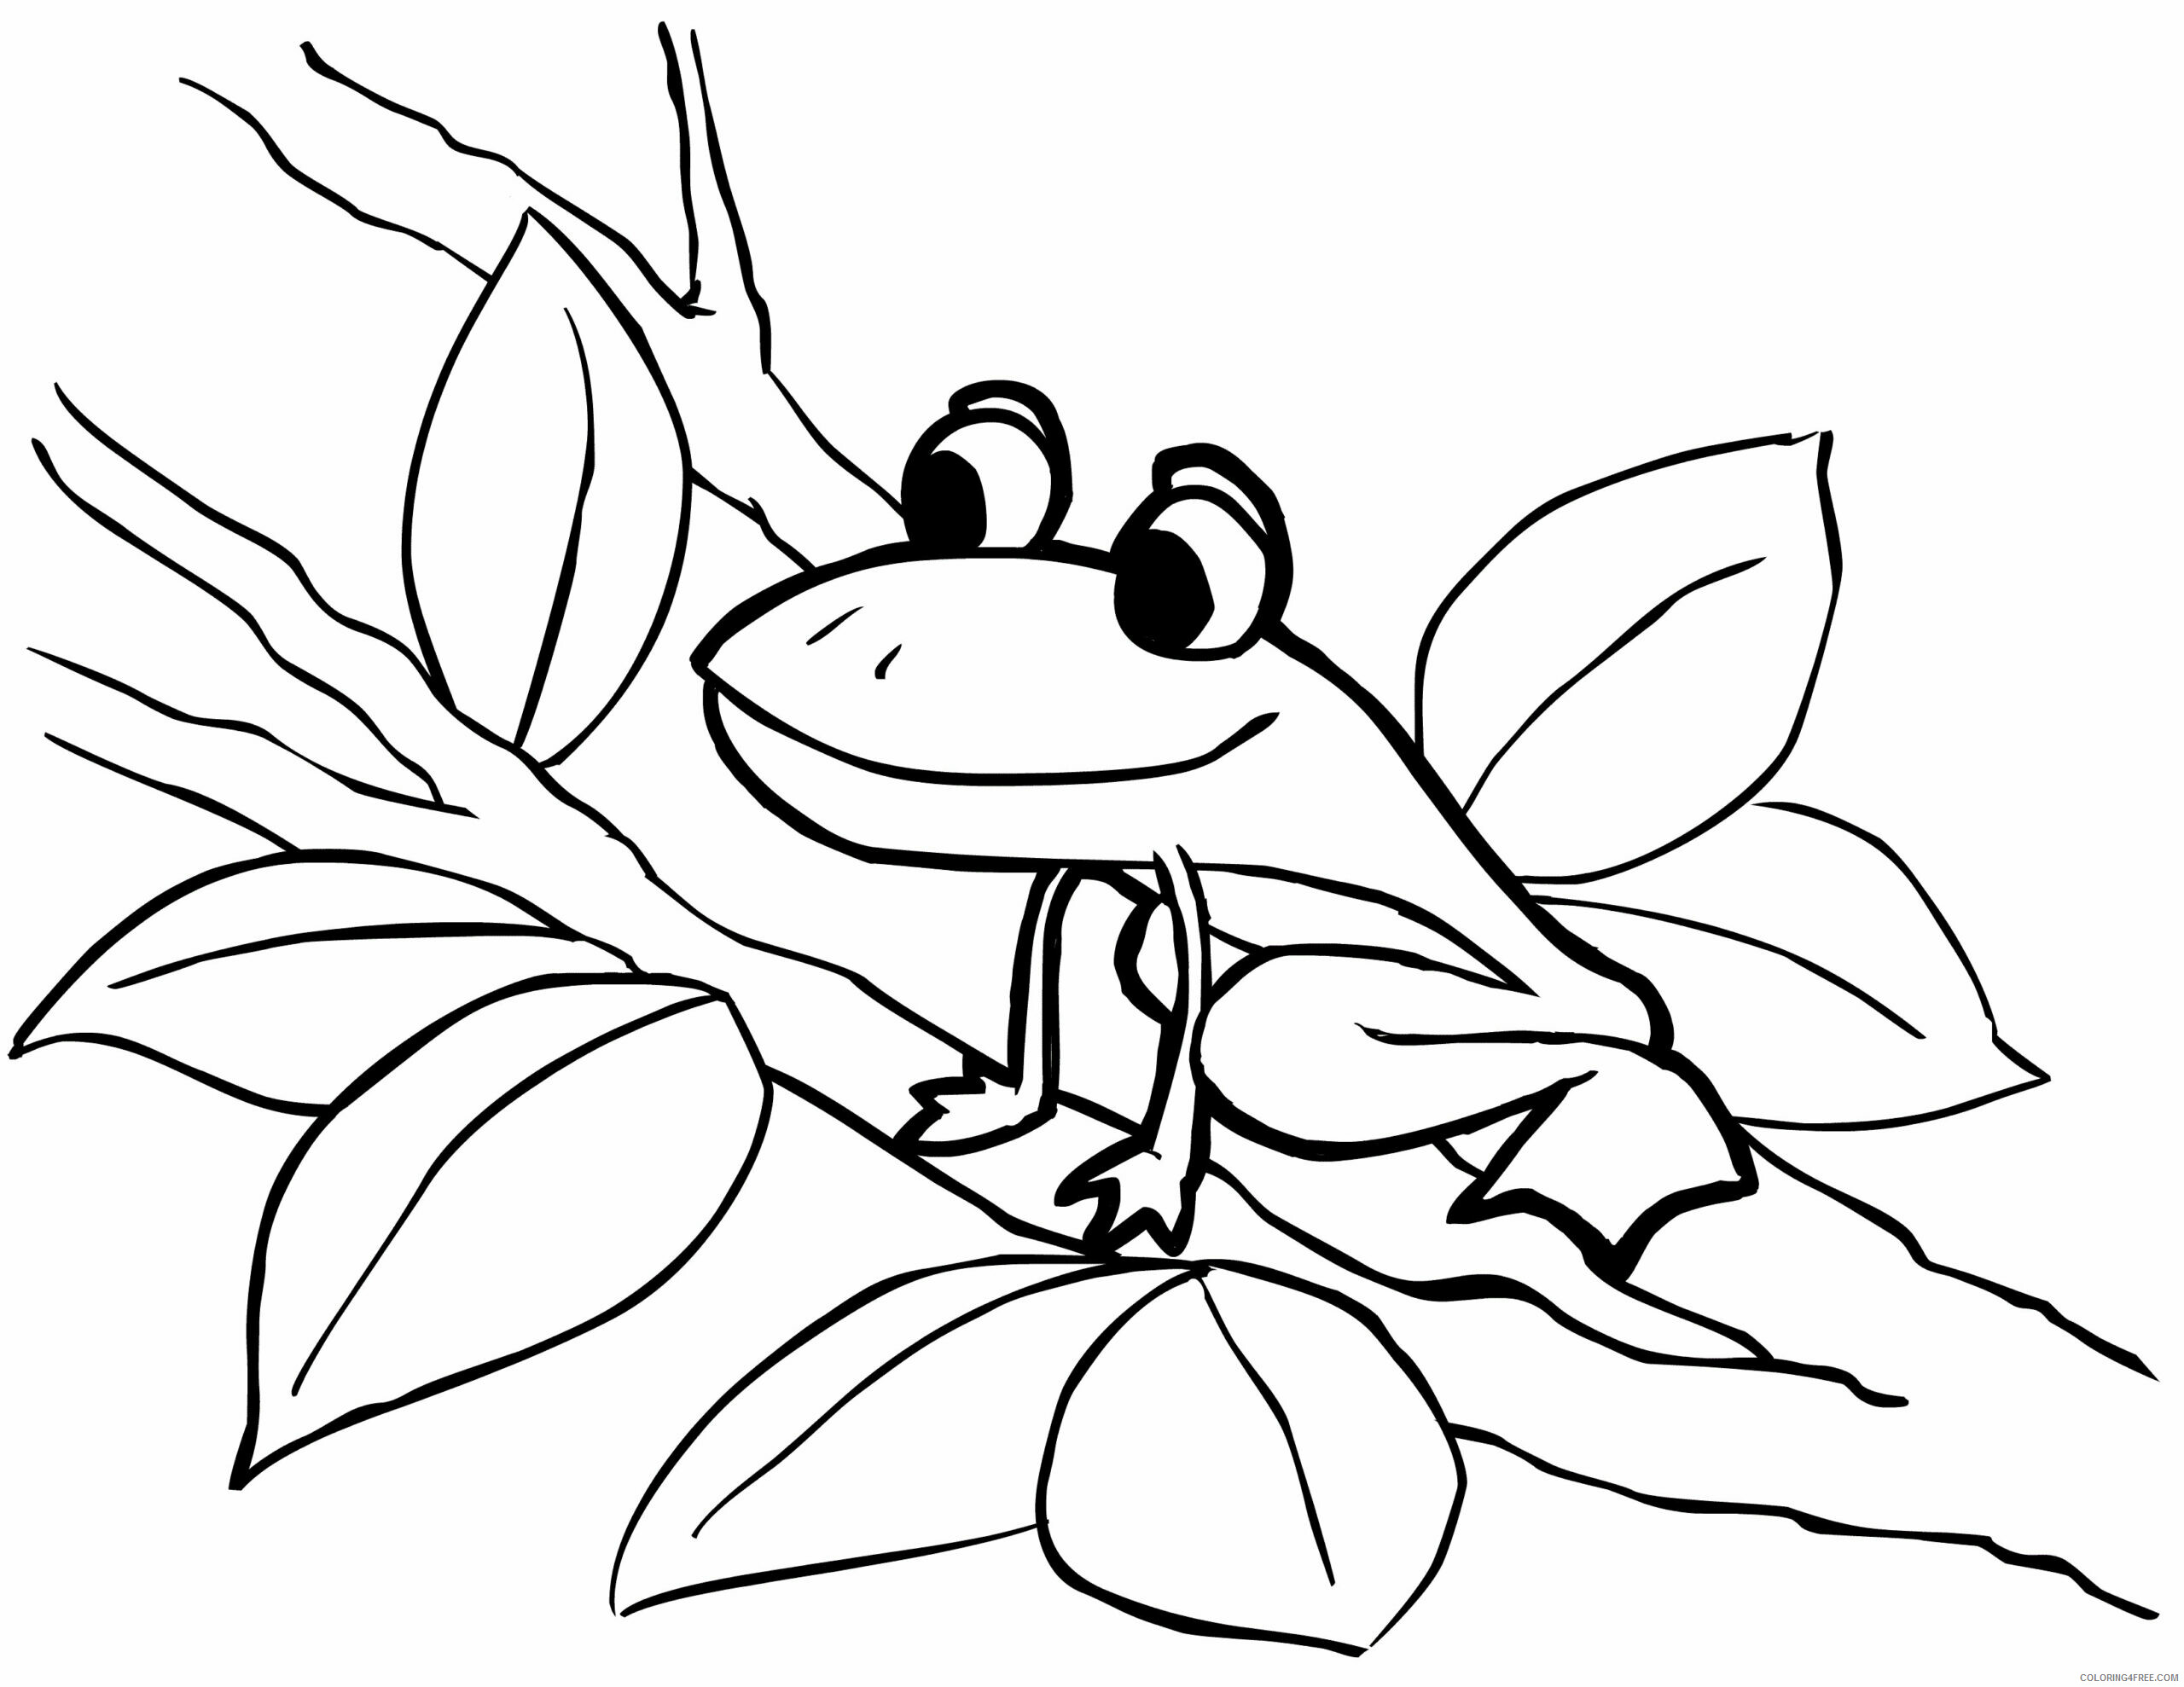 Frog Coloring Pages Animal Printable Sheets Cute Frog 2021 2274 Coloring4free